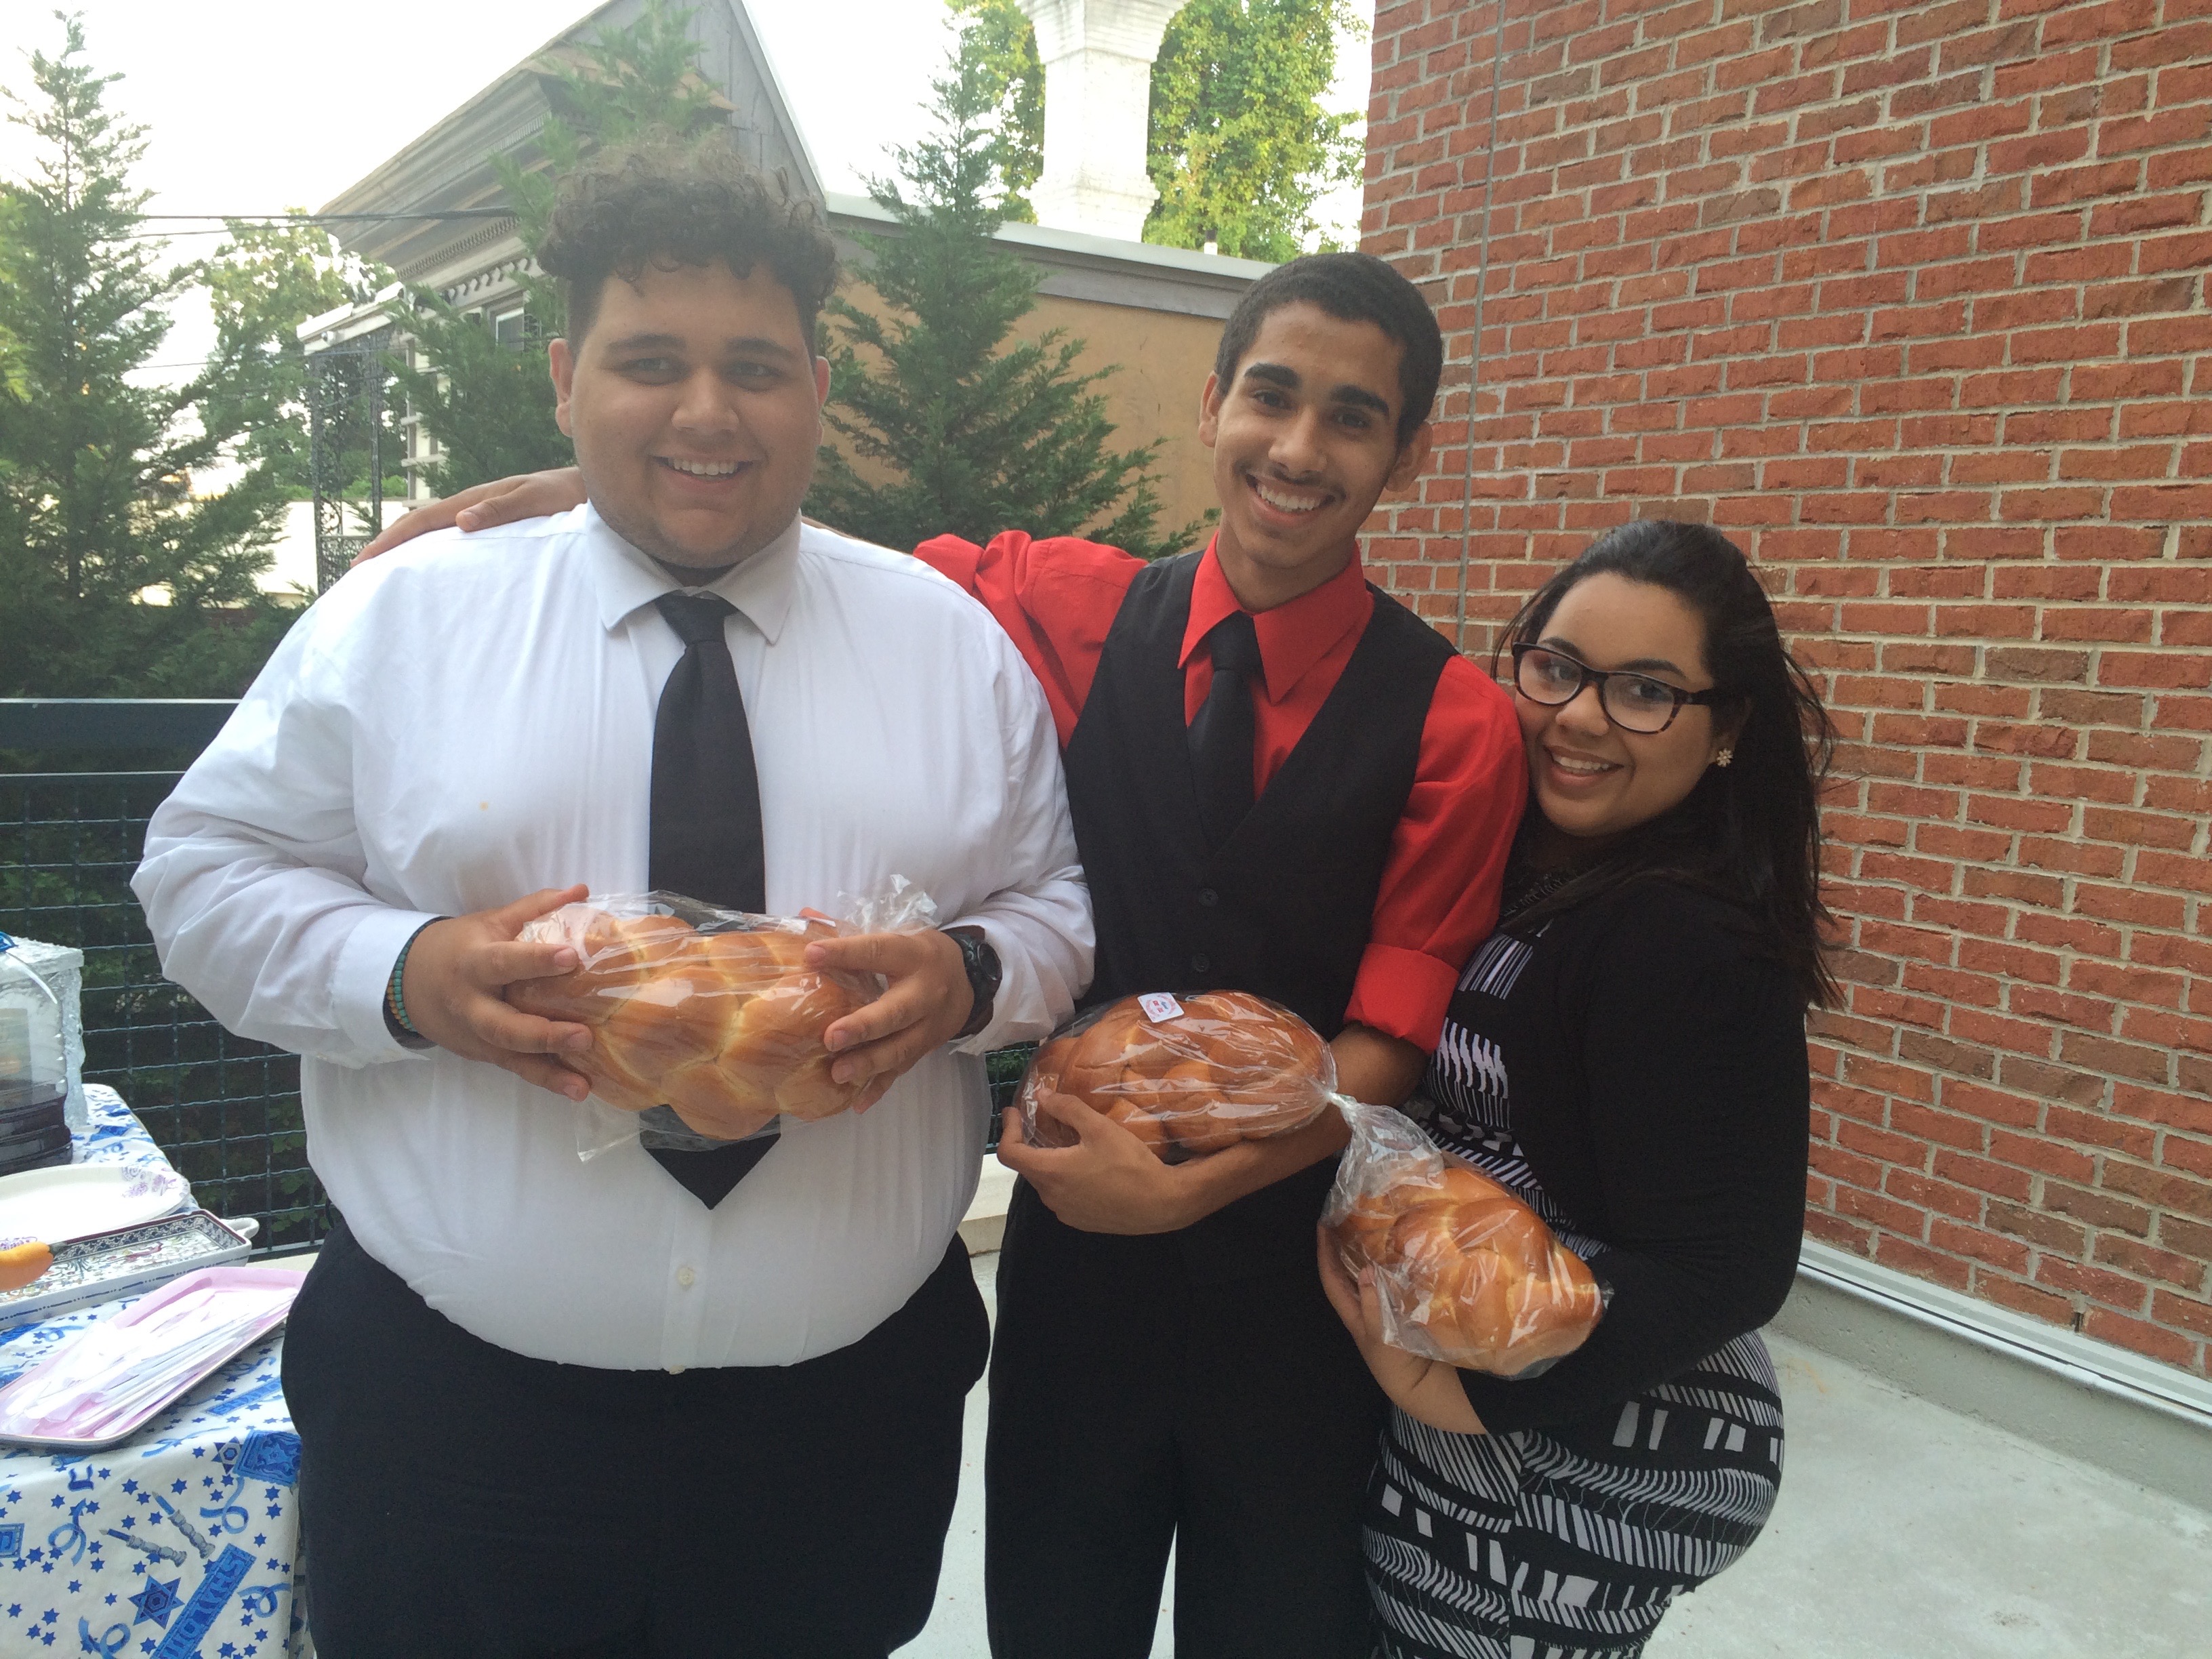 Quinten, Justin and Dory with their challah bread